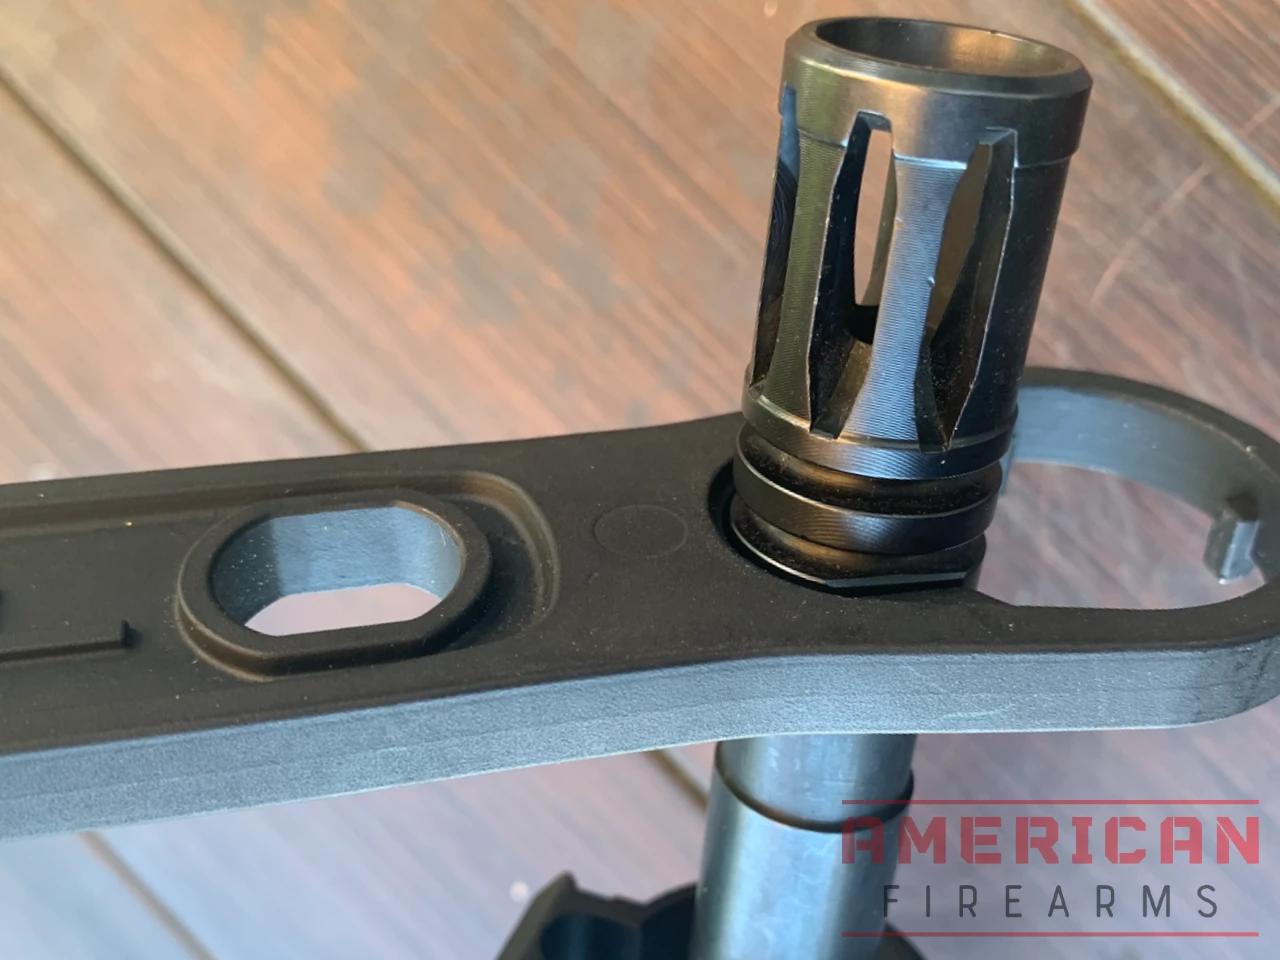 The Magpul Armorers Wrench is my go-to for simple tweaks, like swapping a muzzle device.